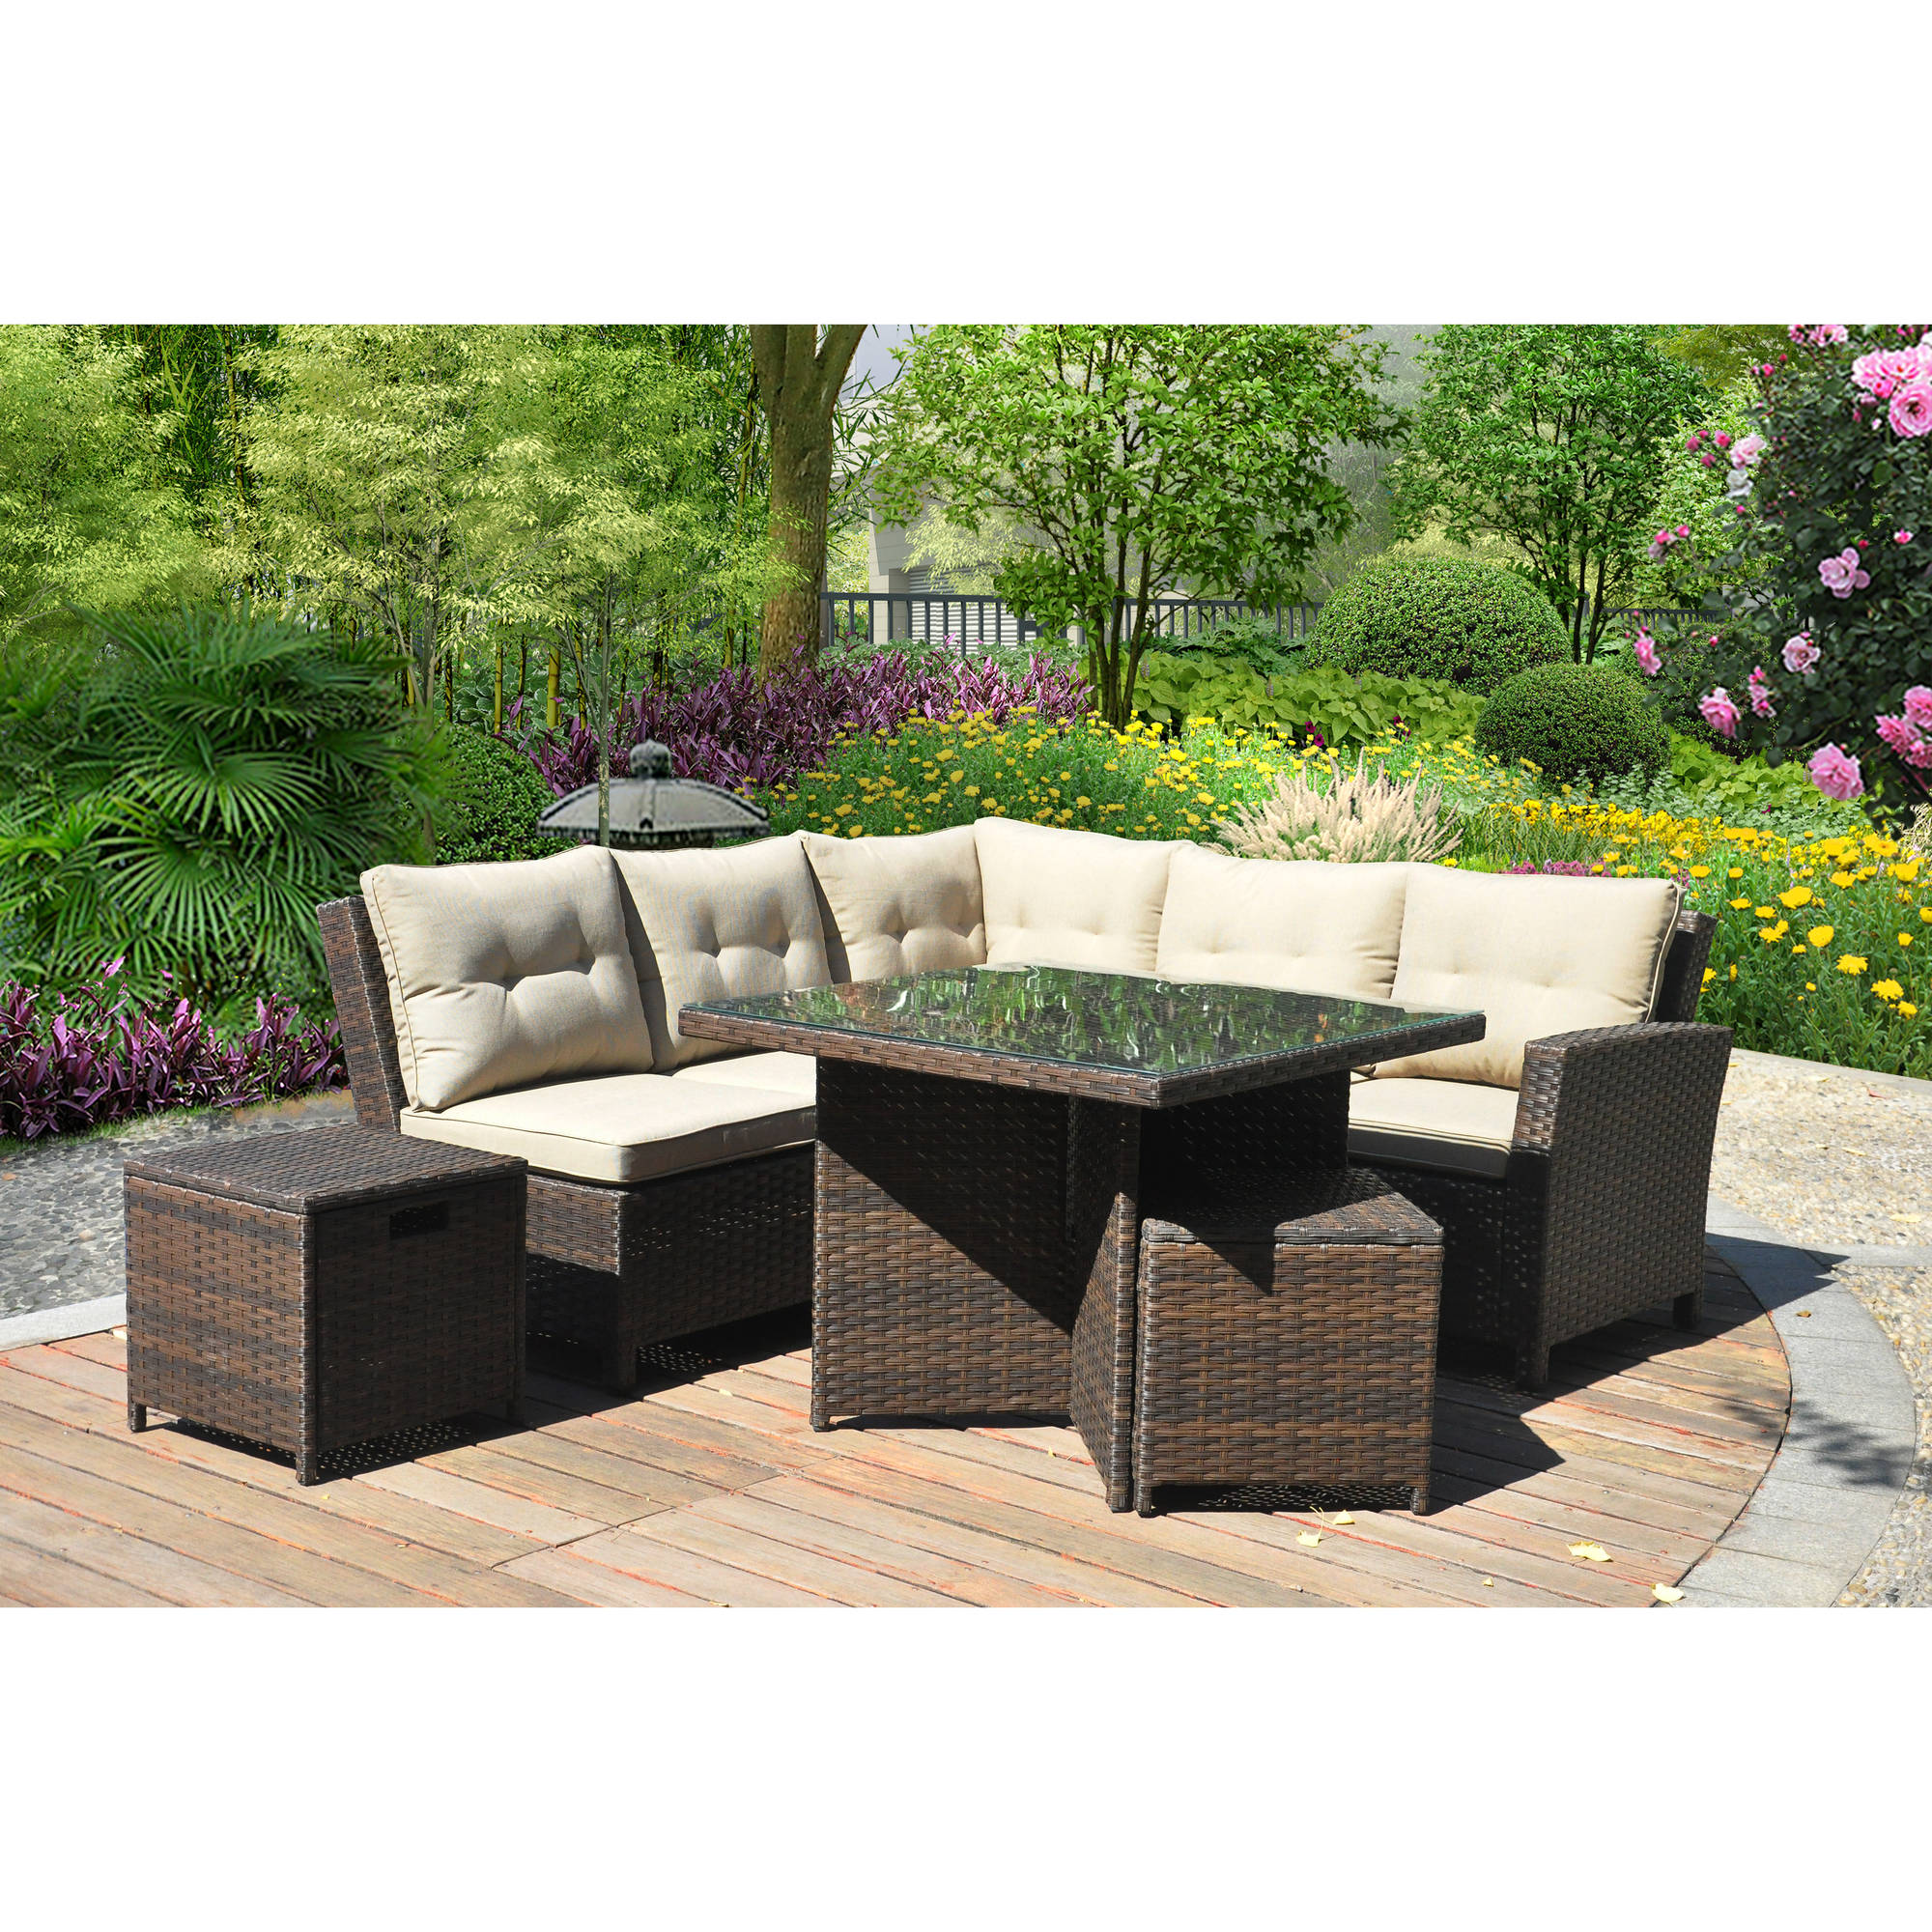 Better Homes and Gardens Baytown 5-Piece Woven Sectional Sofa Set, Seats 5 - image 1 of 6